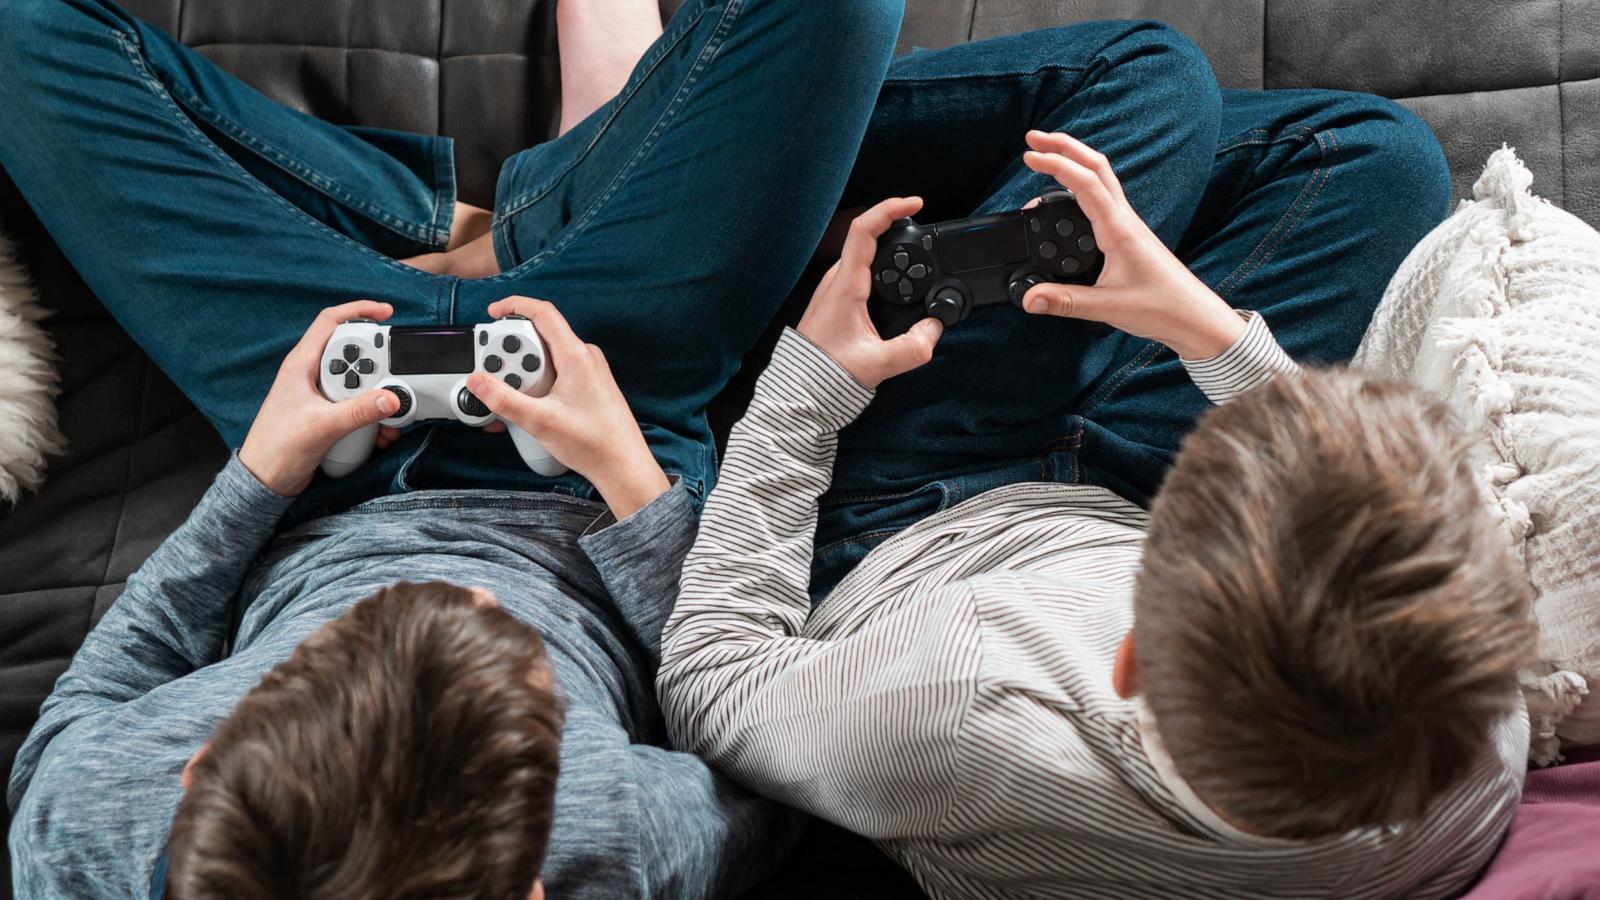 Bad at video games? Your brain structure may be at fault